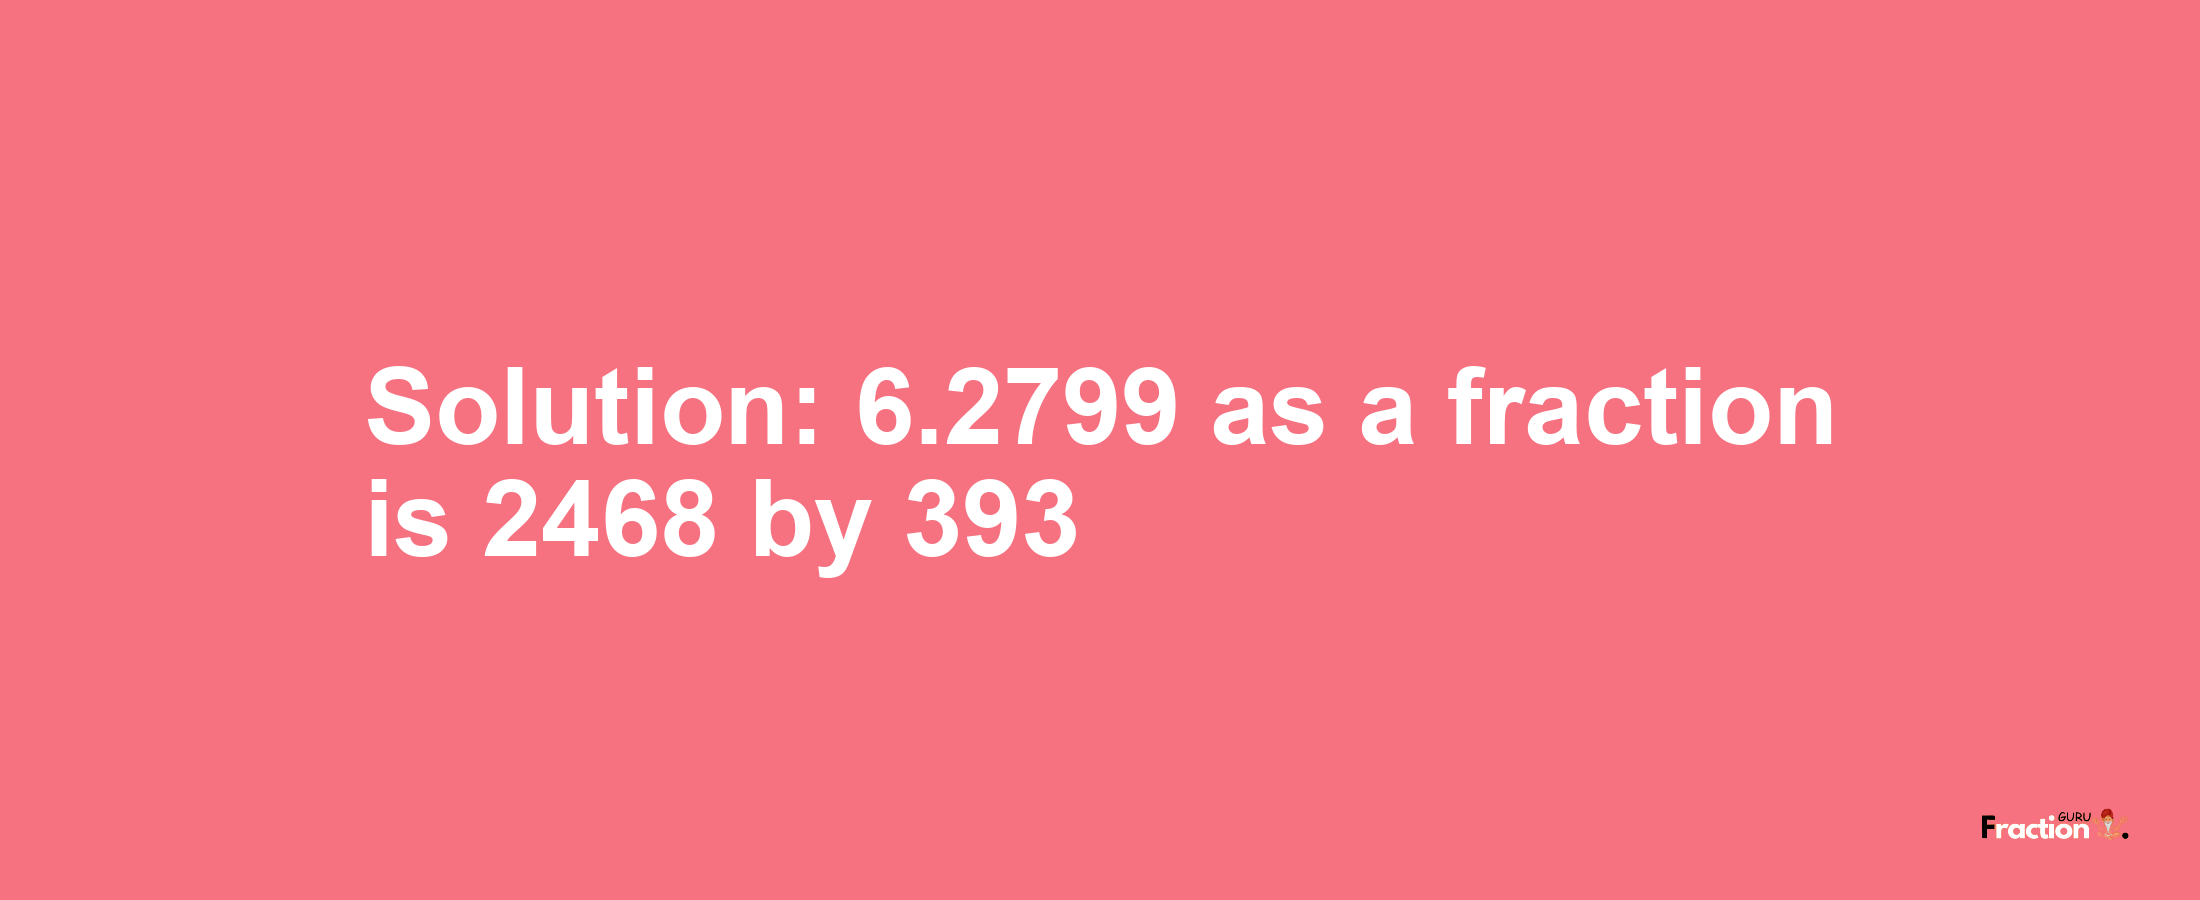 Solution:6.2799 as a fraction is 2468/393